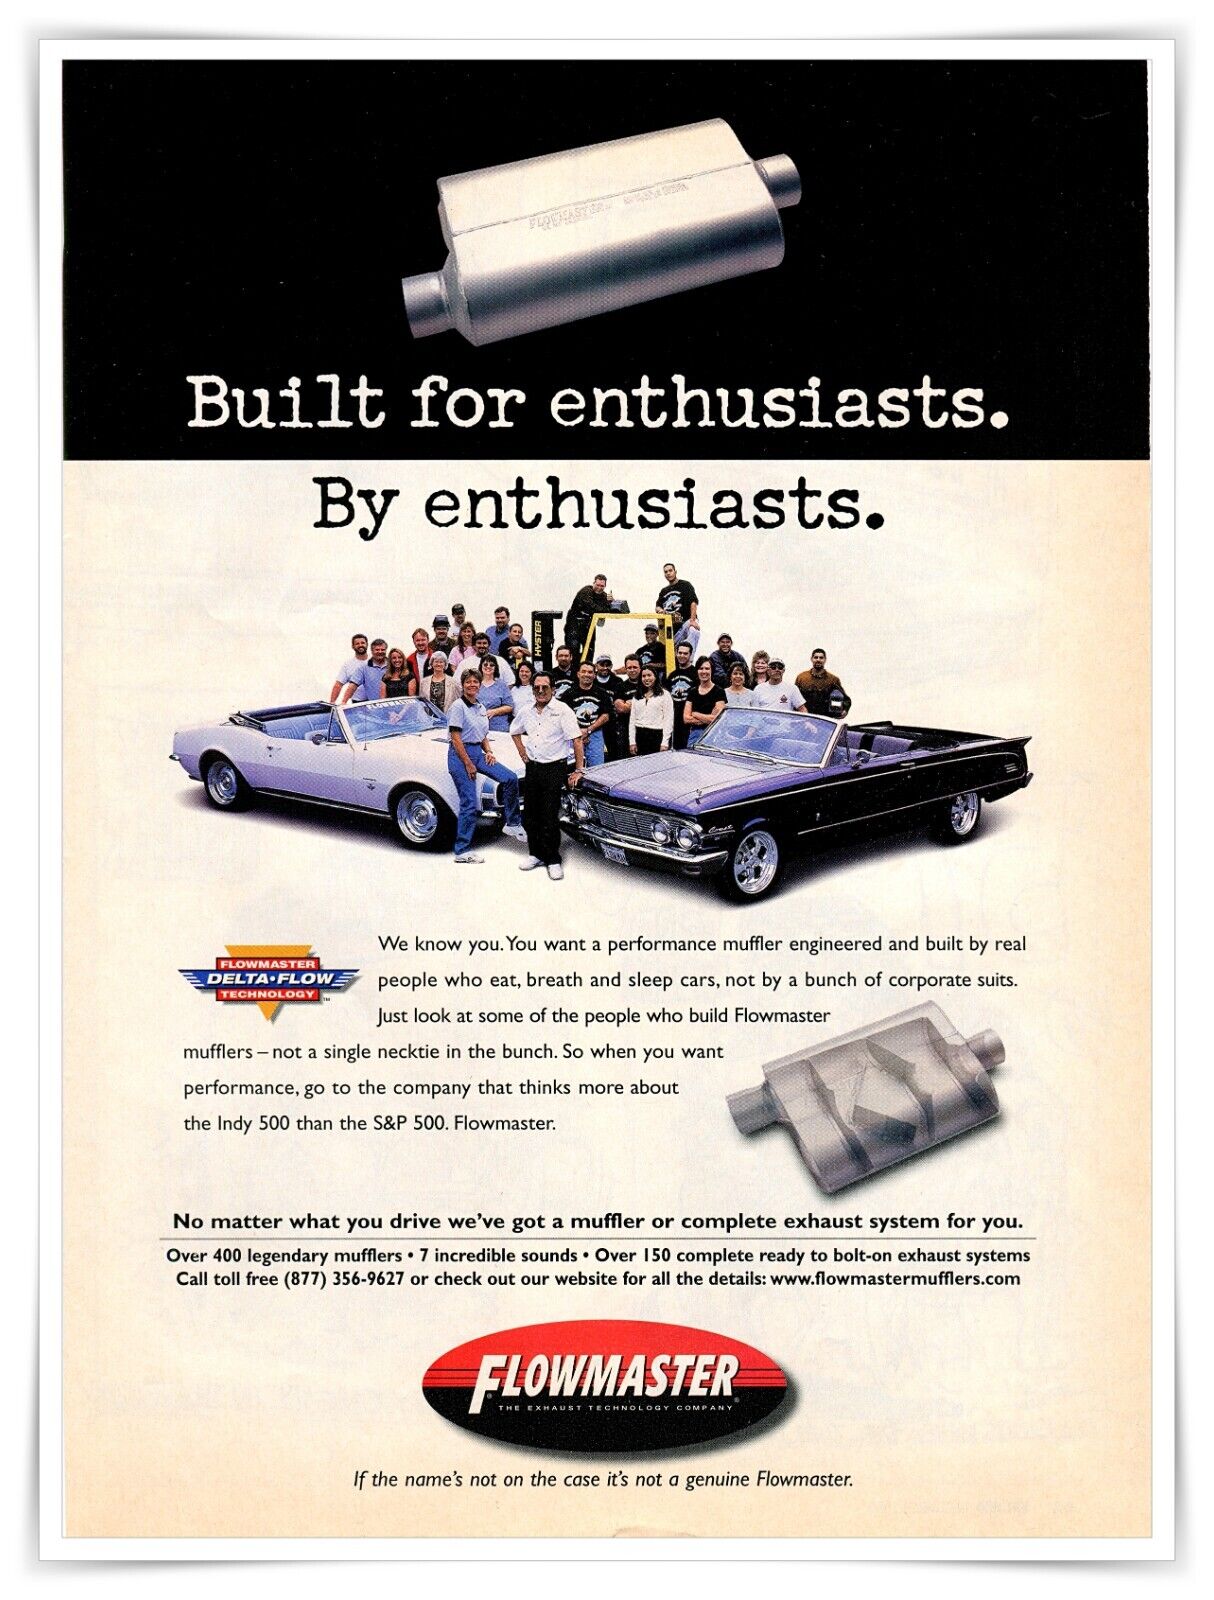 Flowmaster Mufflers Built for Enthusiasts Vintage 2000 Full Page Magazine Ad